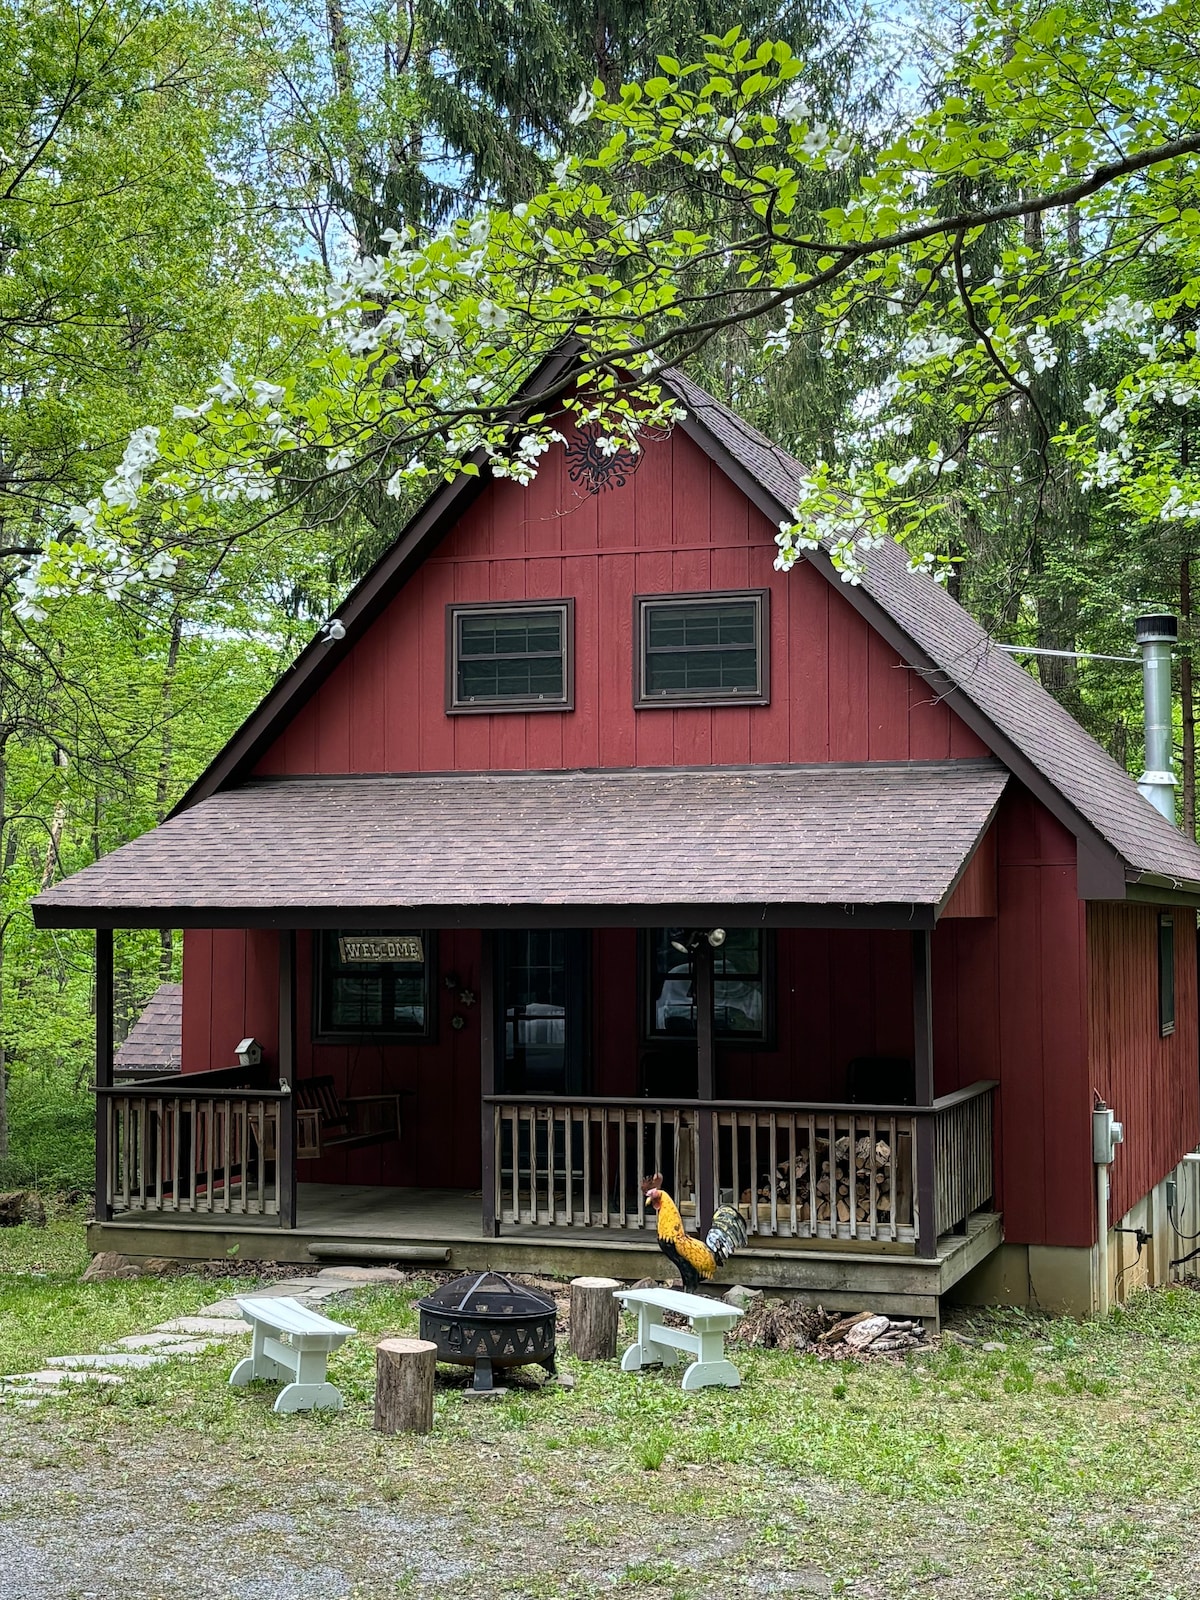 “Little Red Cabin” in the woods